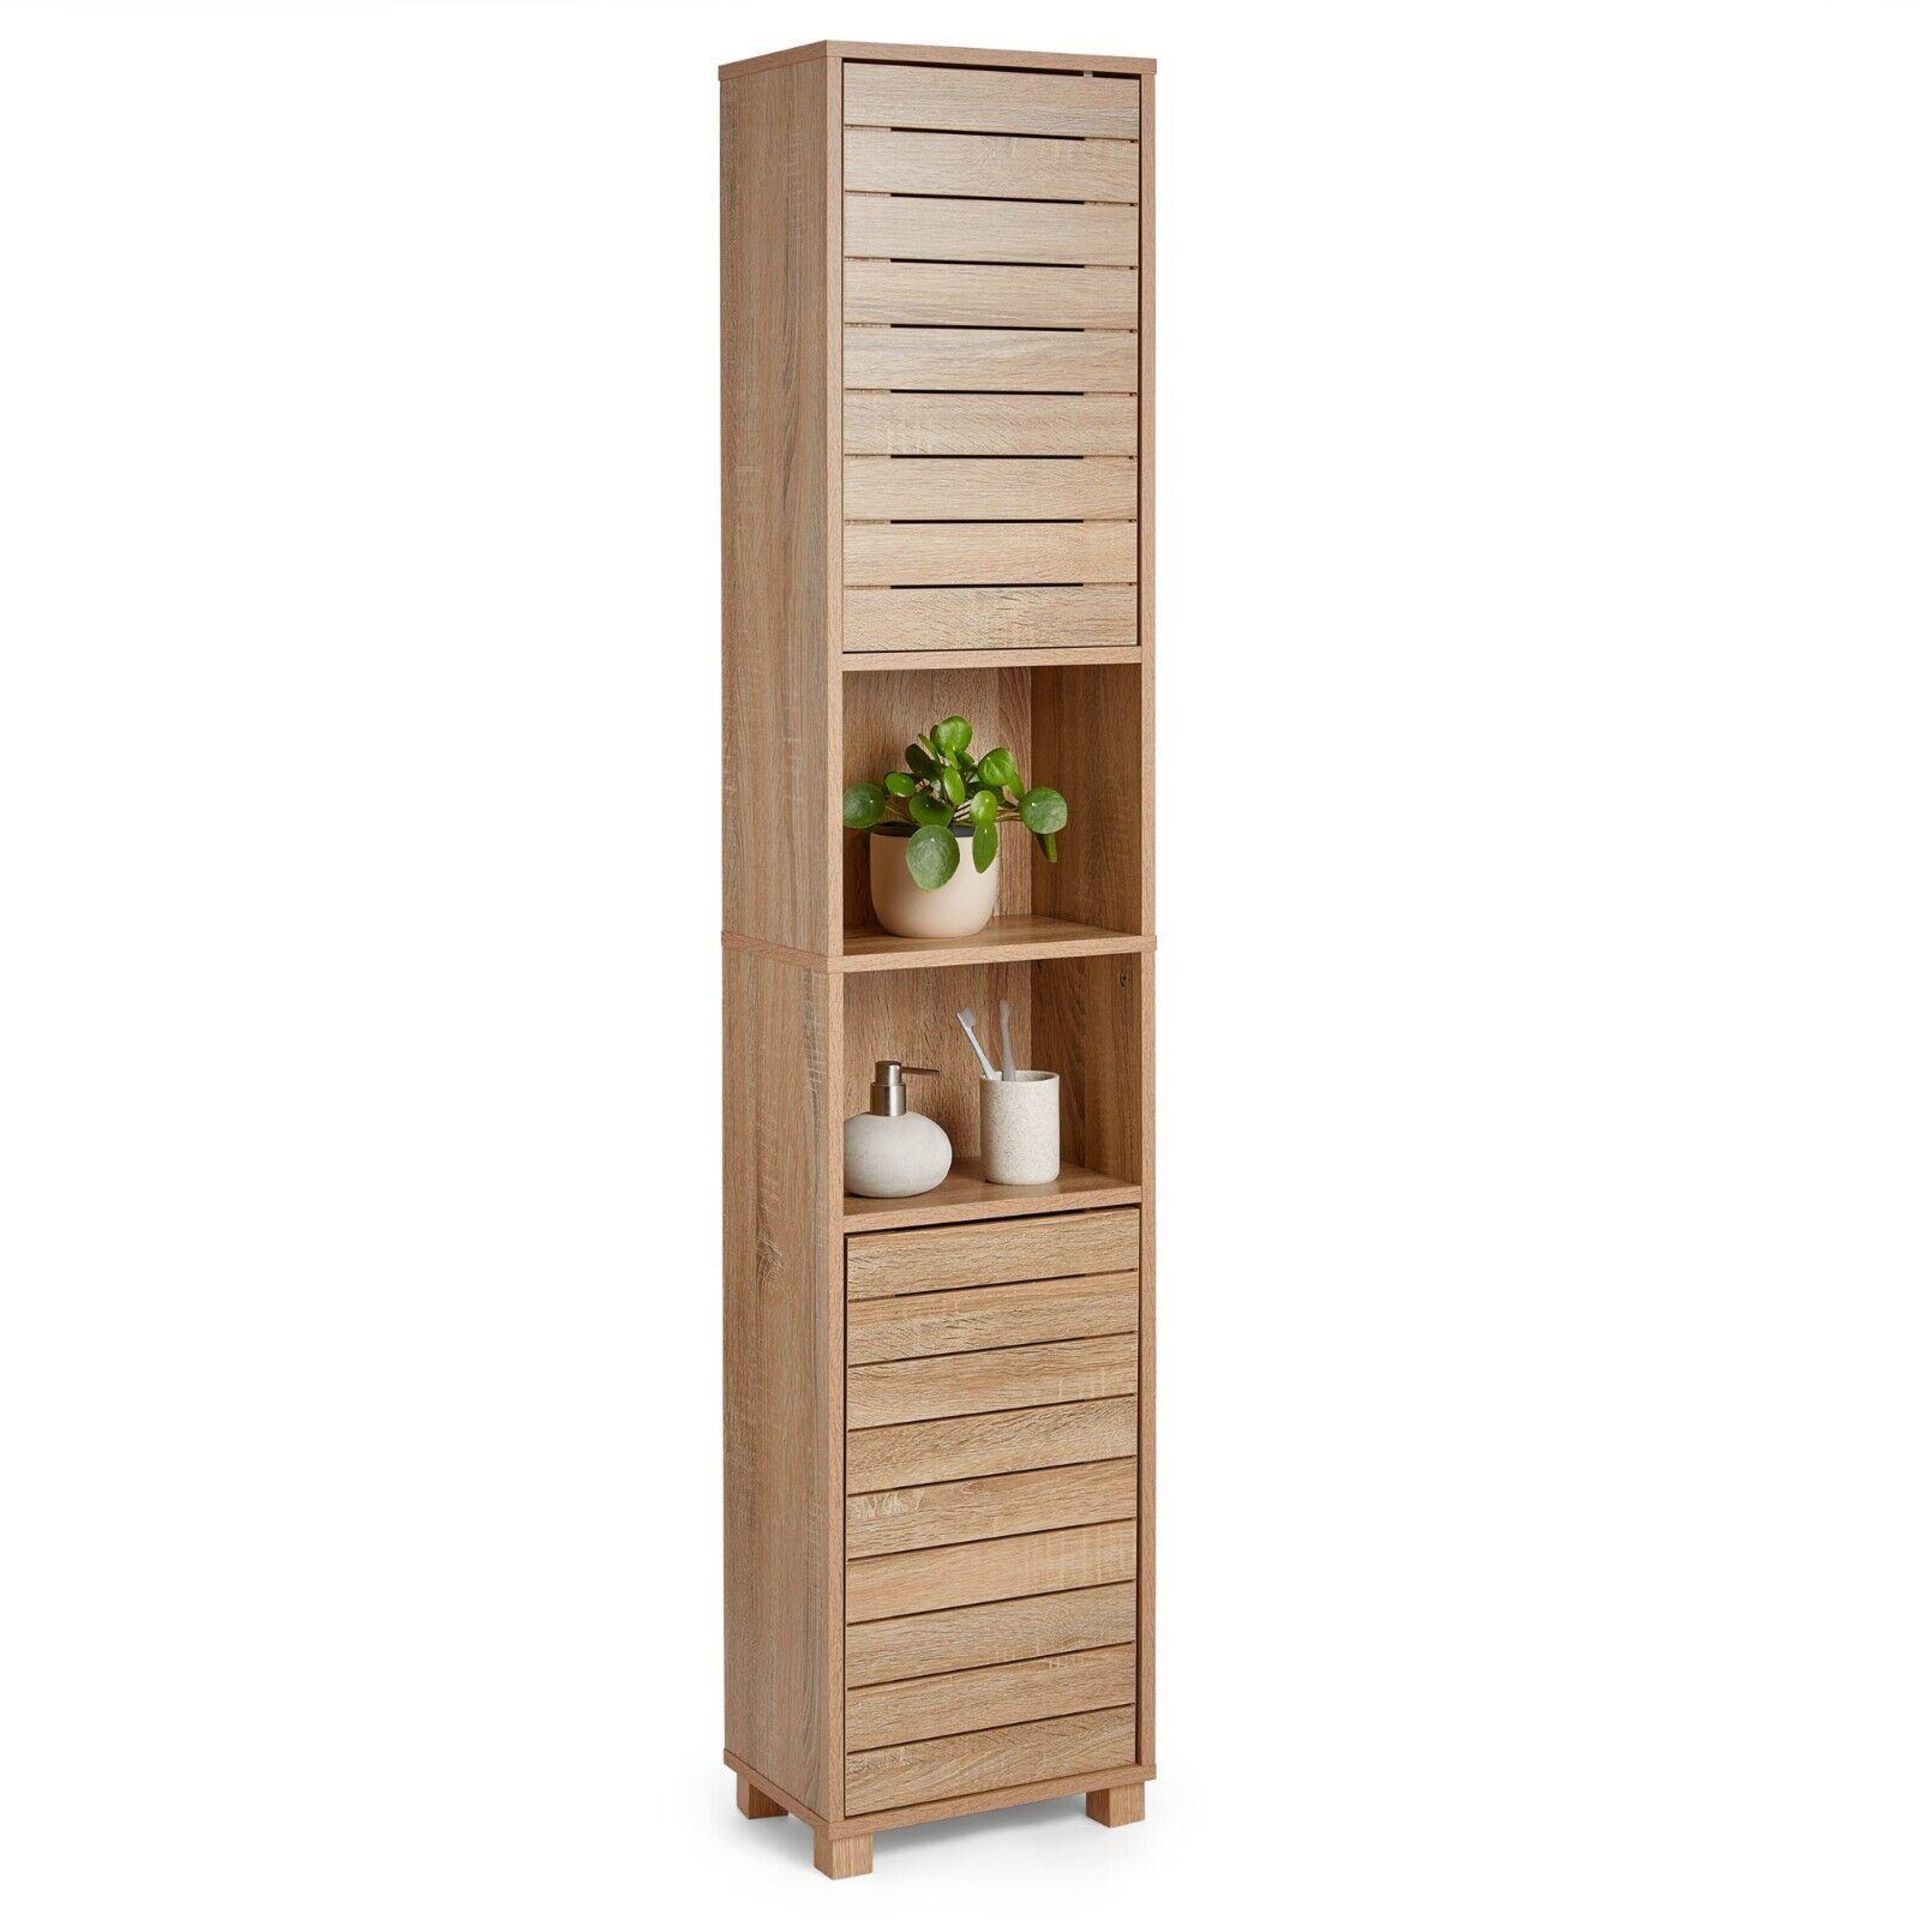 Luxury Tall Bathroom Cabinet (ER35) Brand: Luxury Specifications: Number of doors: 2Colour: